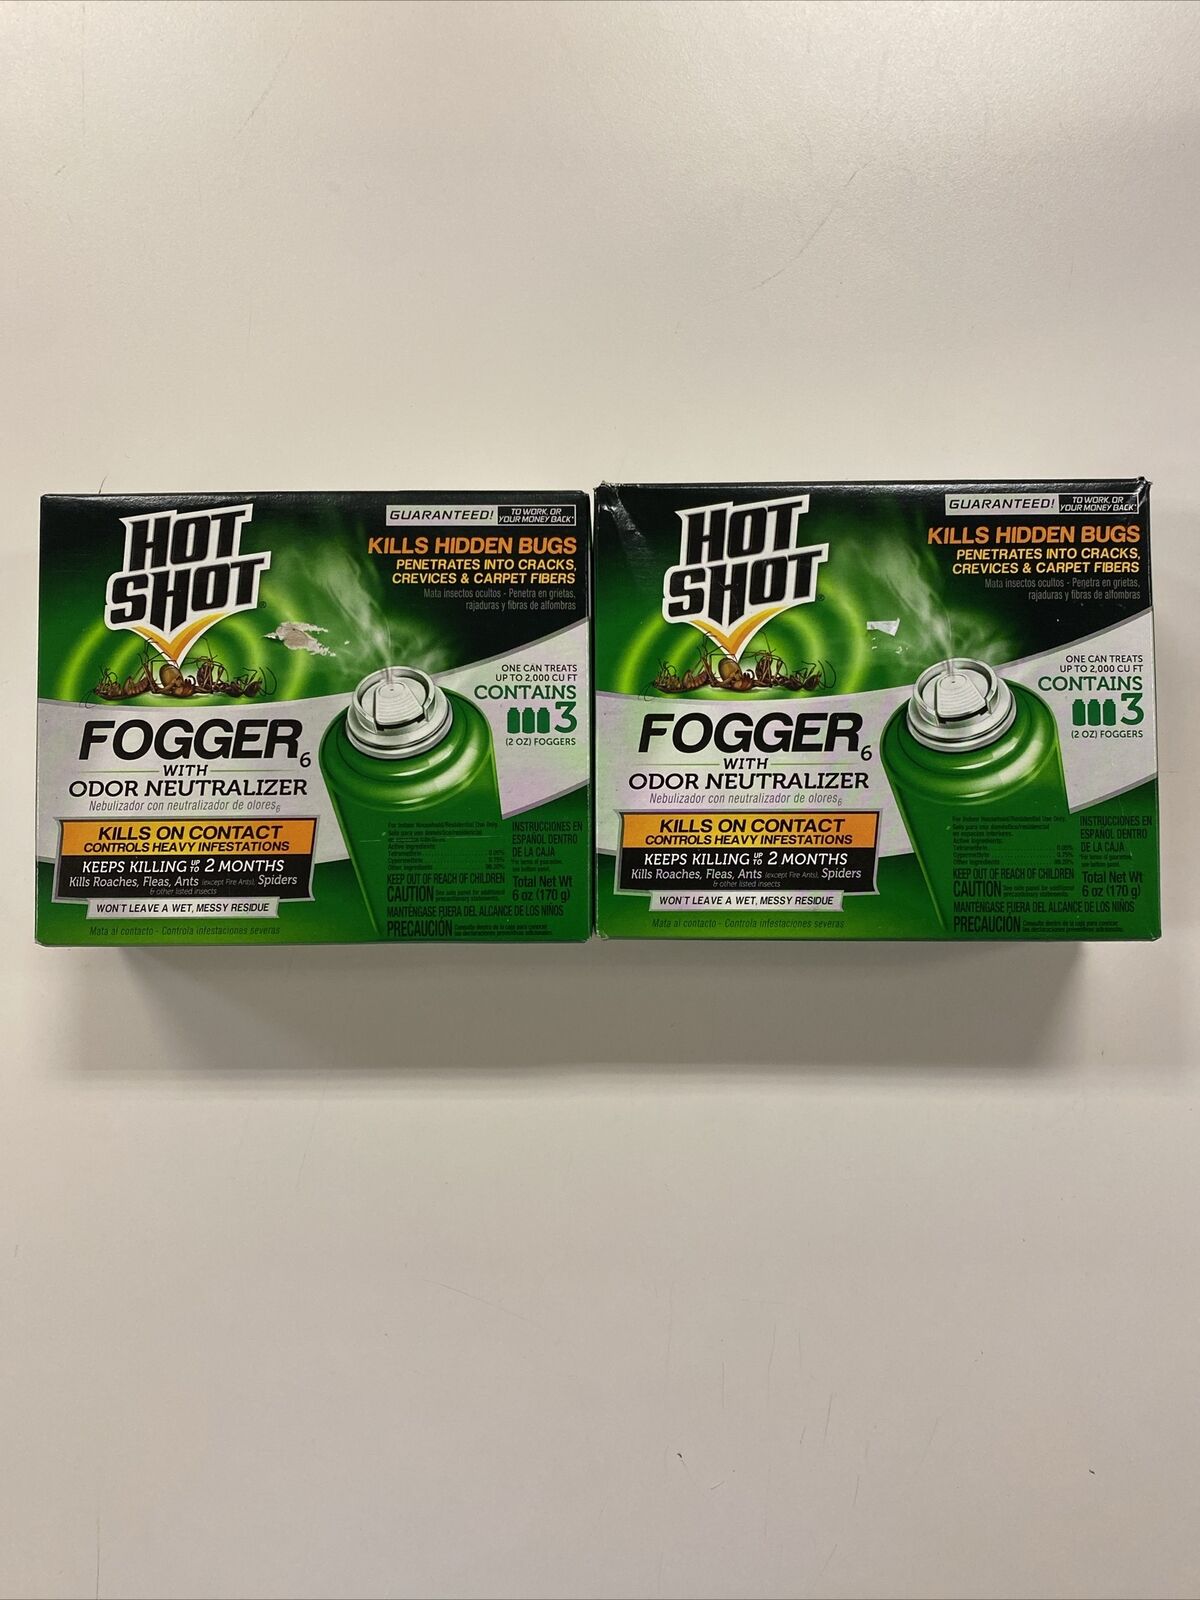 Hot Shot Fogger 6 with Odor Neutralizer - 6 Count, 2 oz. Effective Pest Control